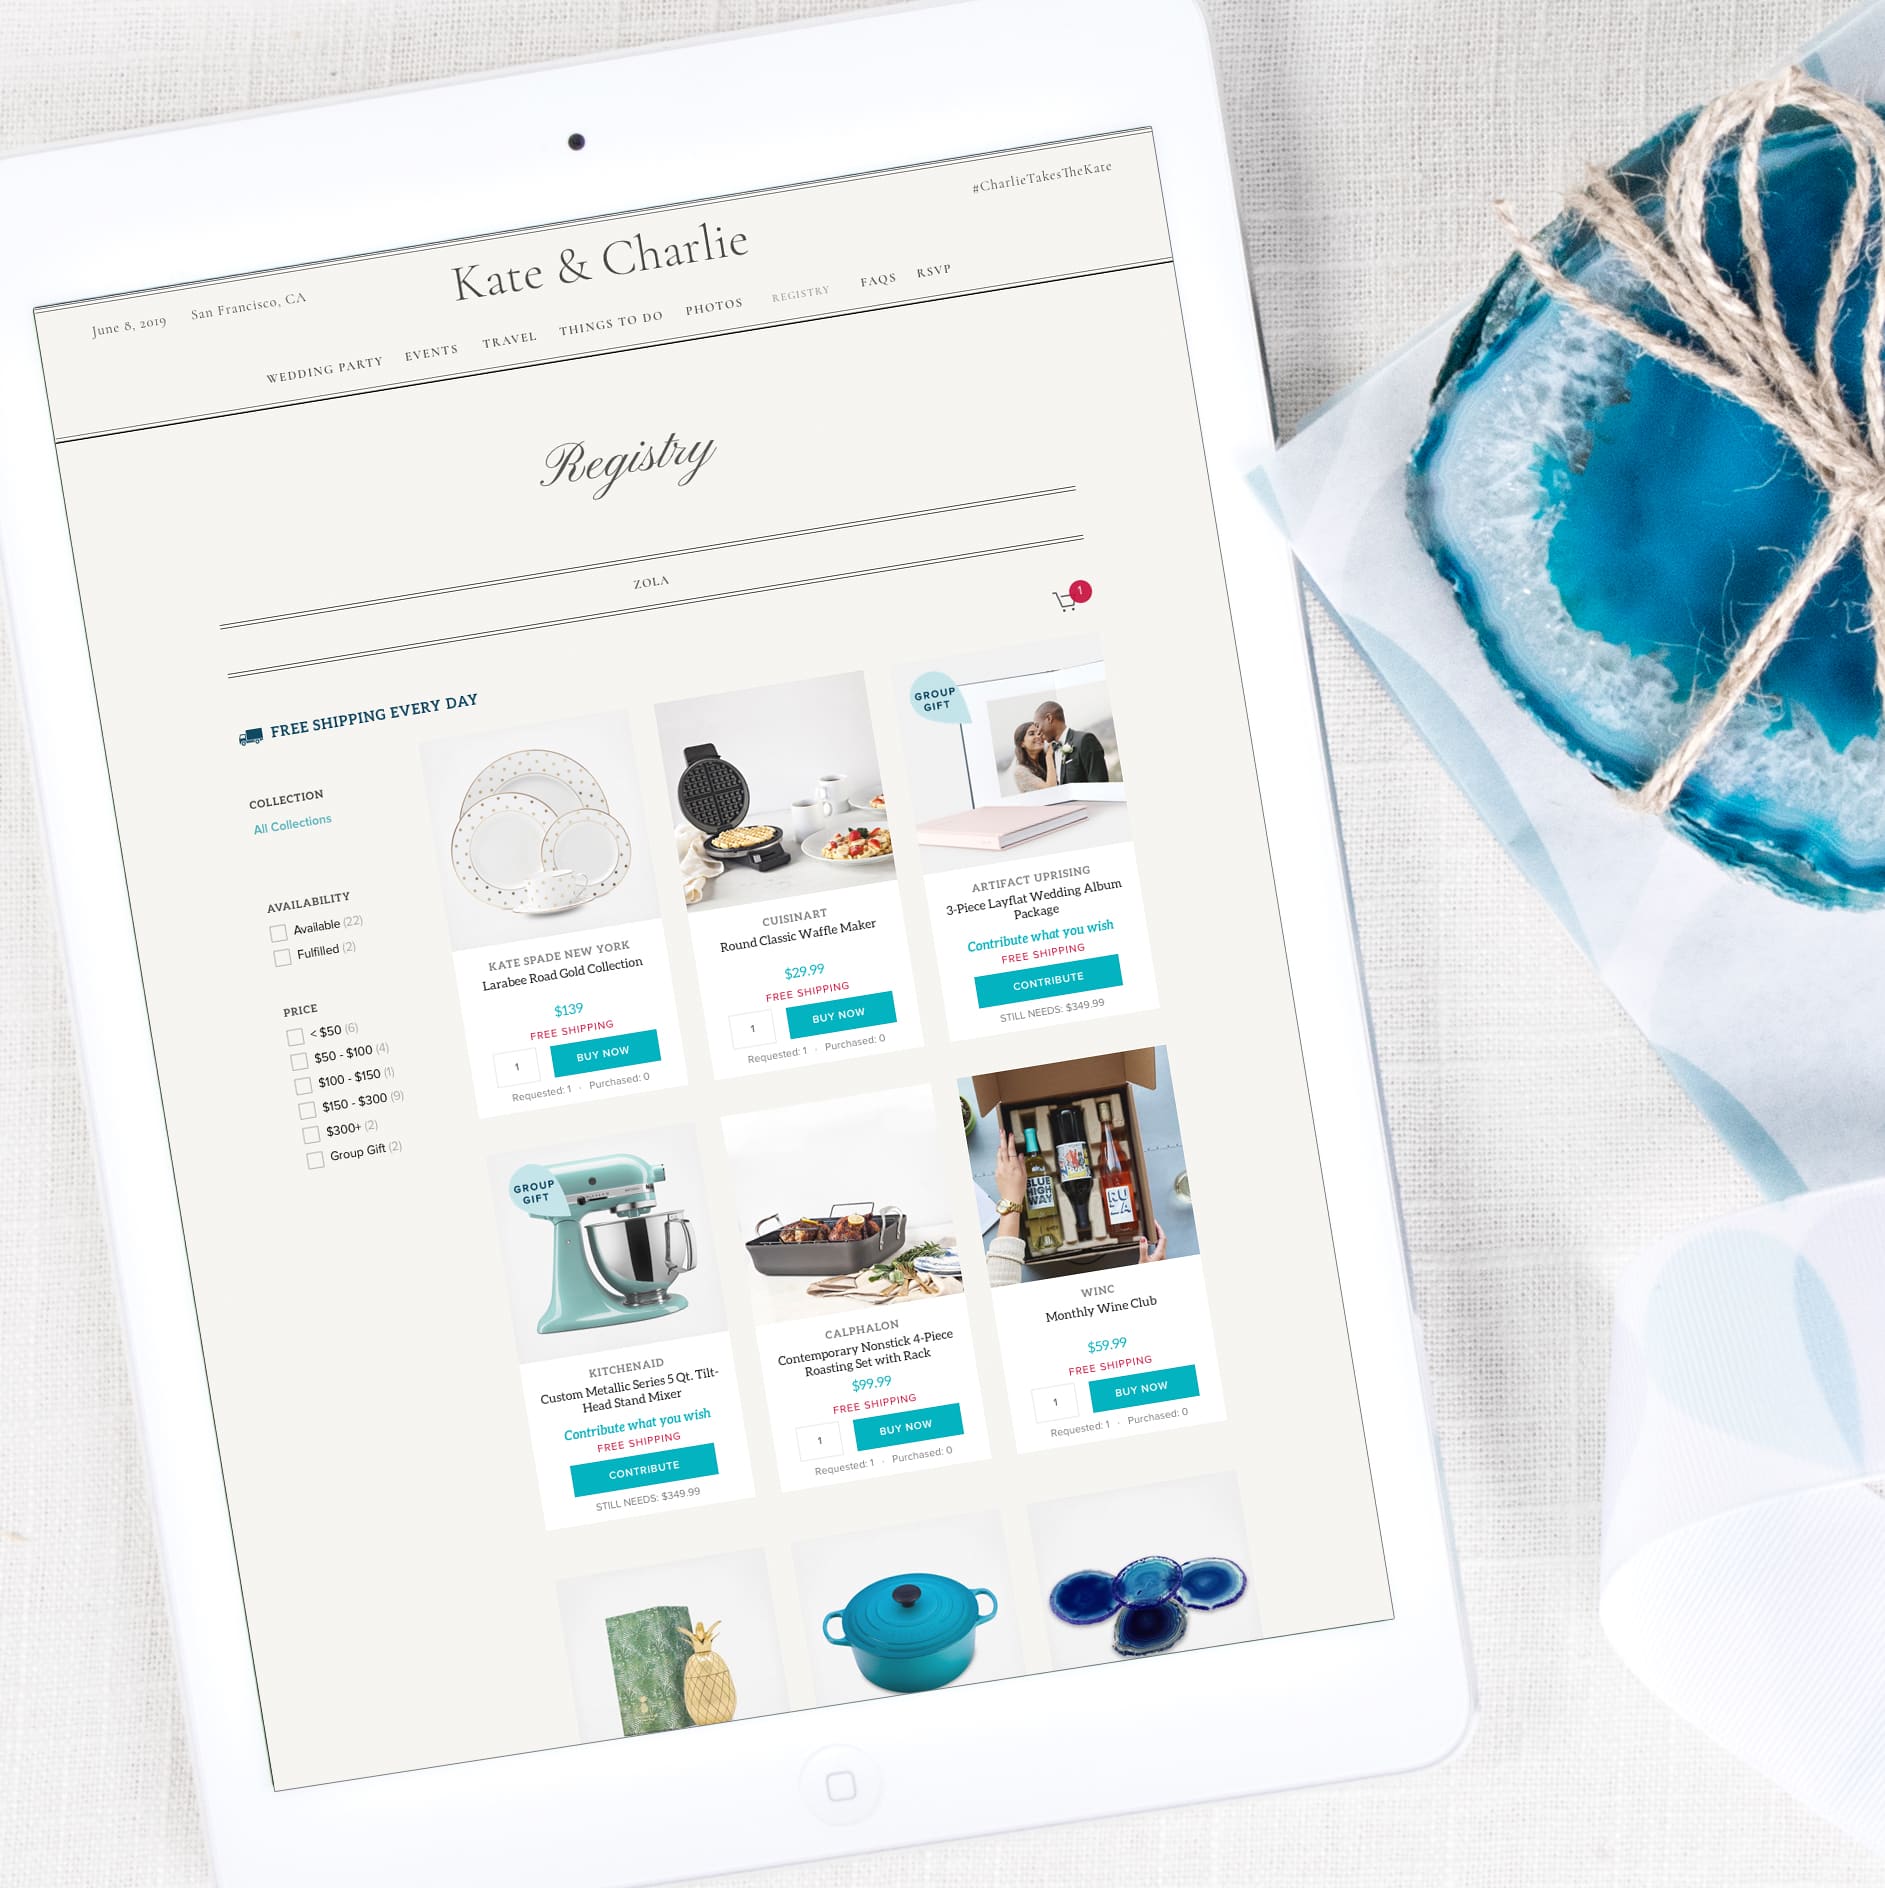 15 Wedding Registry Secrets to Get the Gifts You Really Want - Zola Expert  Wedding Advice